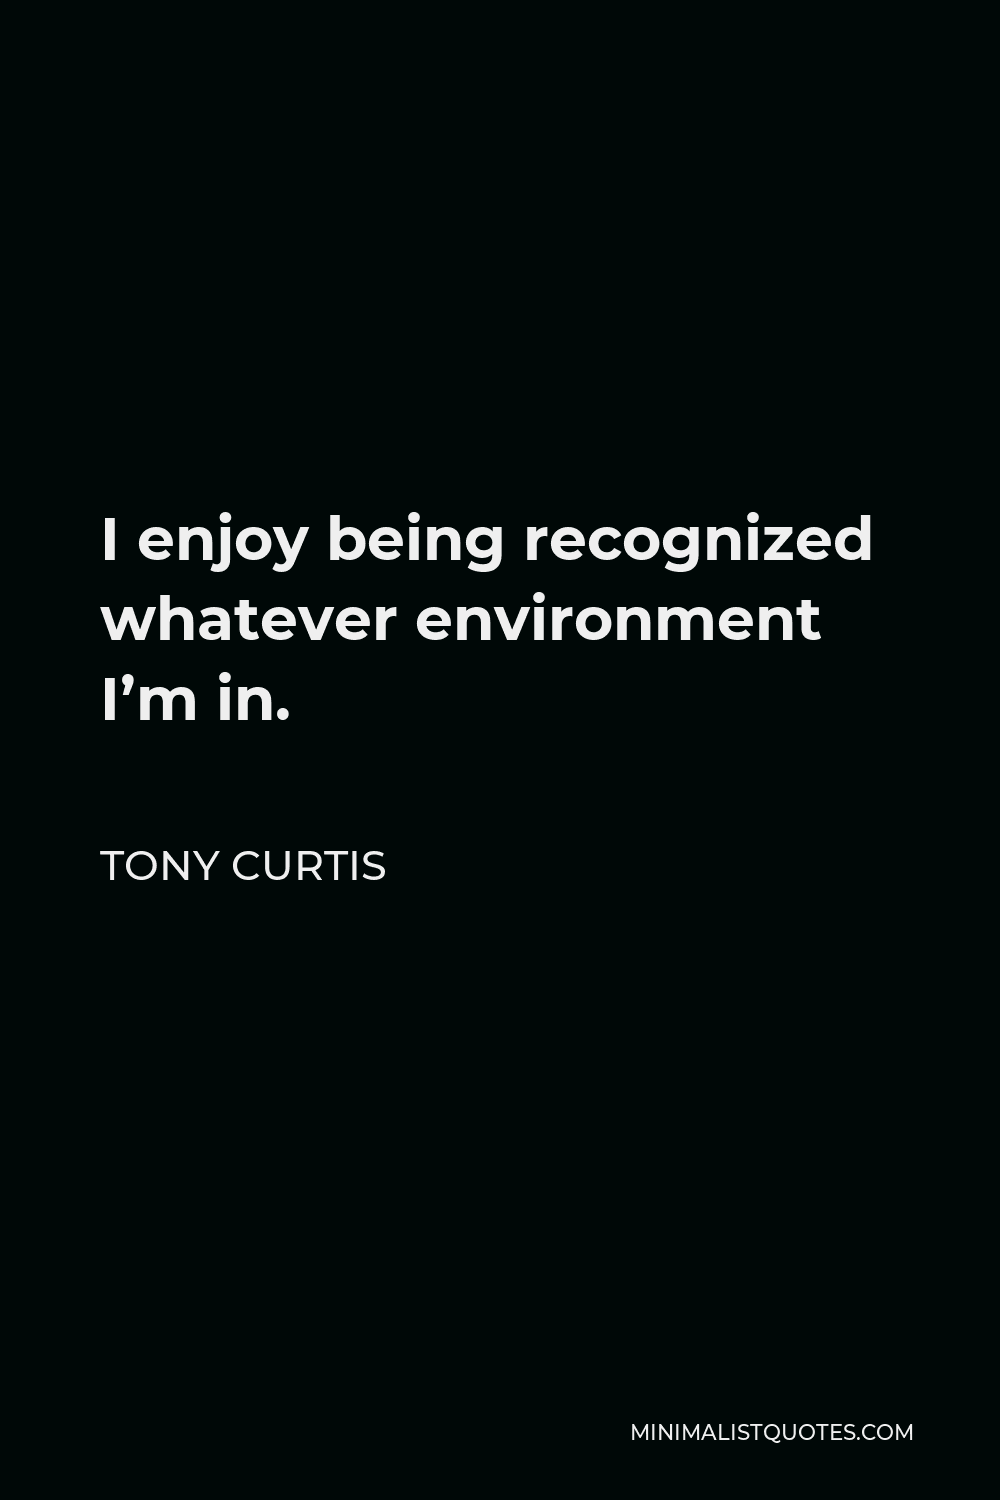 Tony Curtis Quote - I enjoy being recognized whatever environment I’m in.